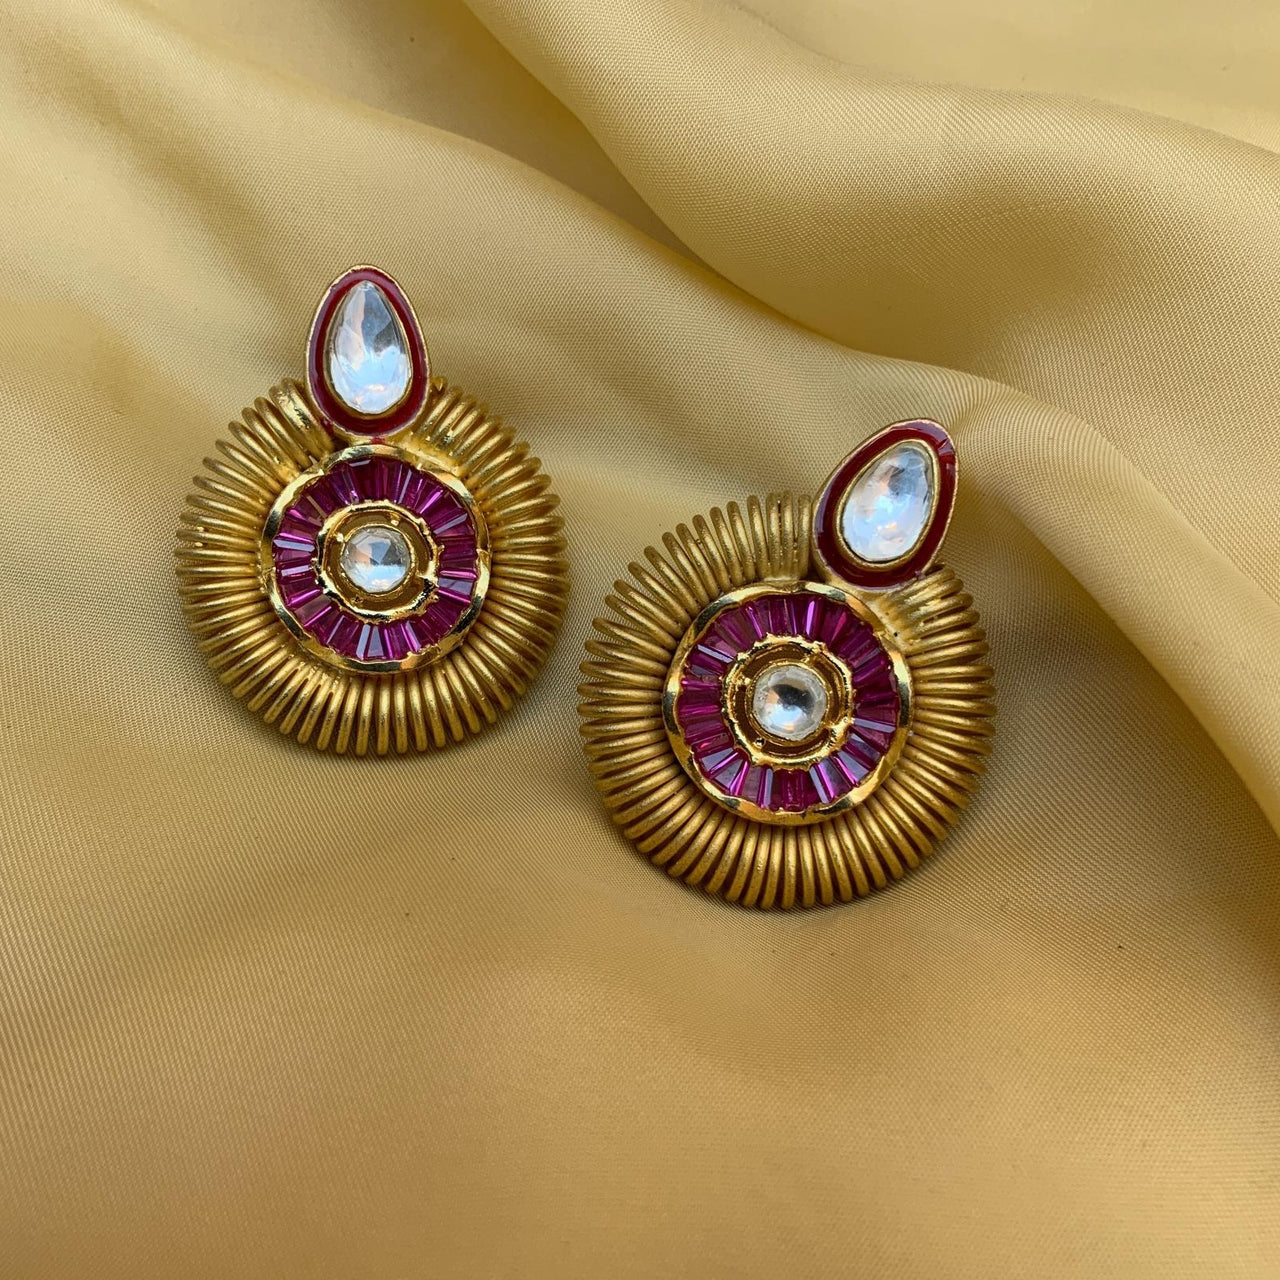 Buy quality Alluring Round Design Gold Studs in Pune